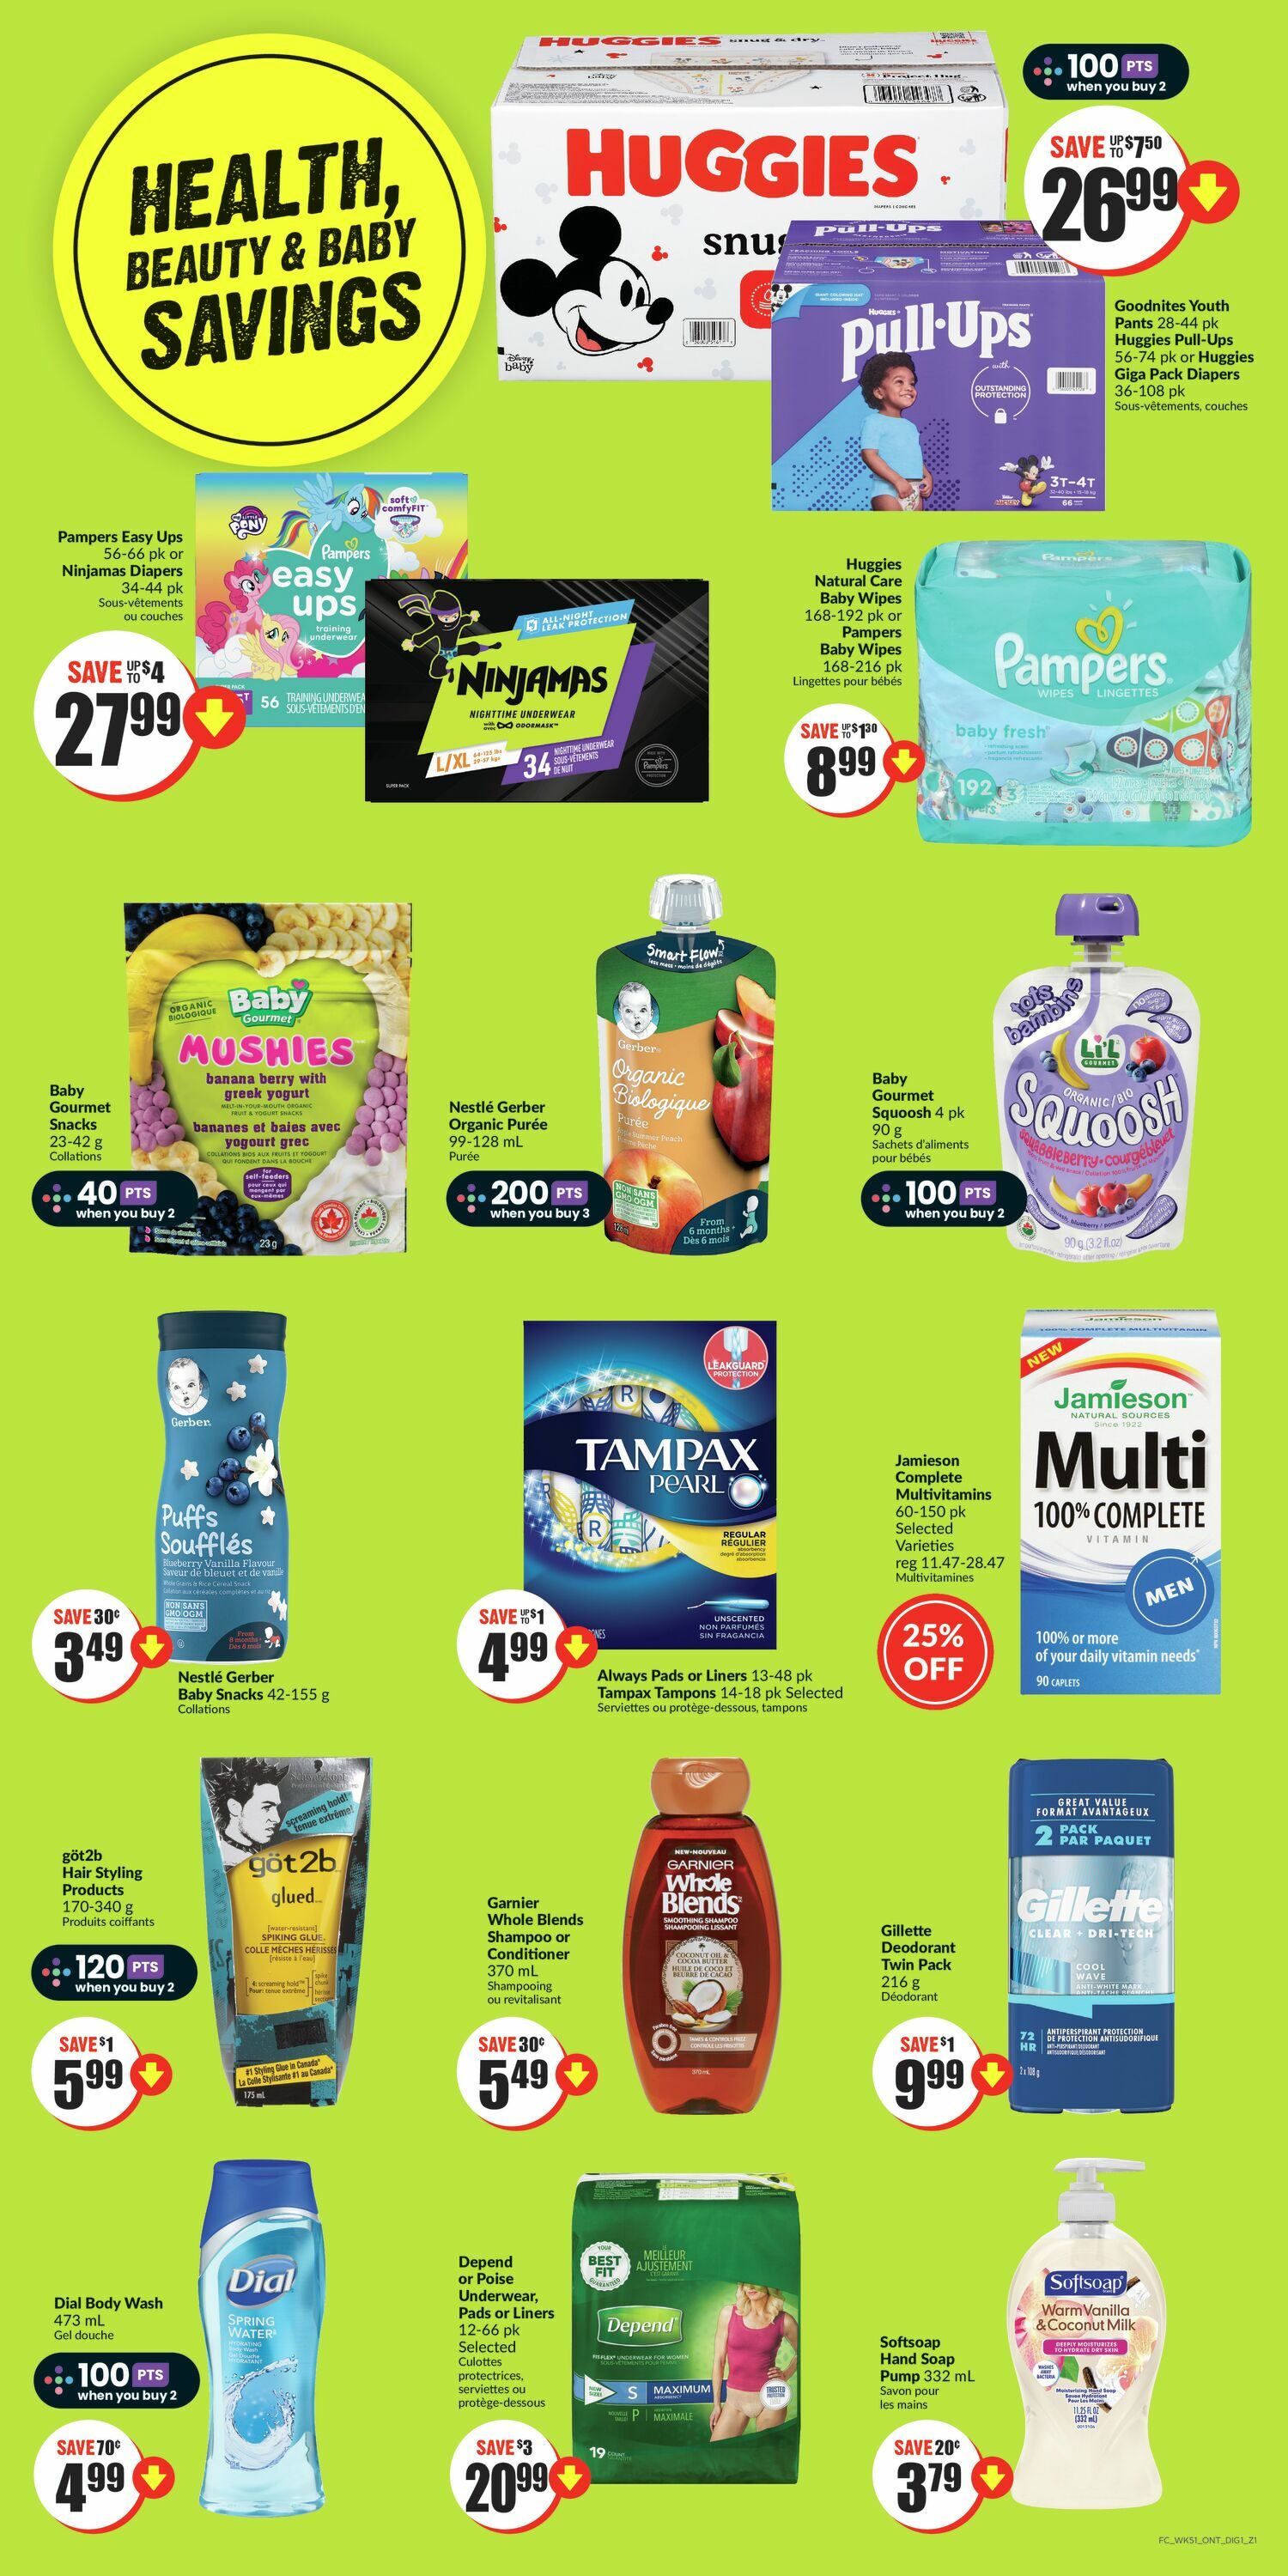 Depend or poise underwear, pads or liners 12-66 pk selected offer at FreshCo